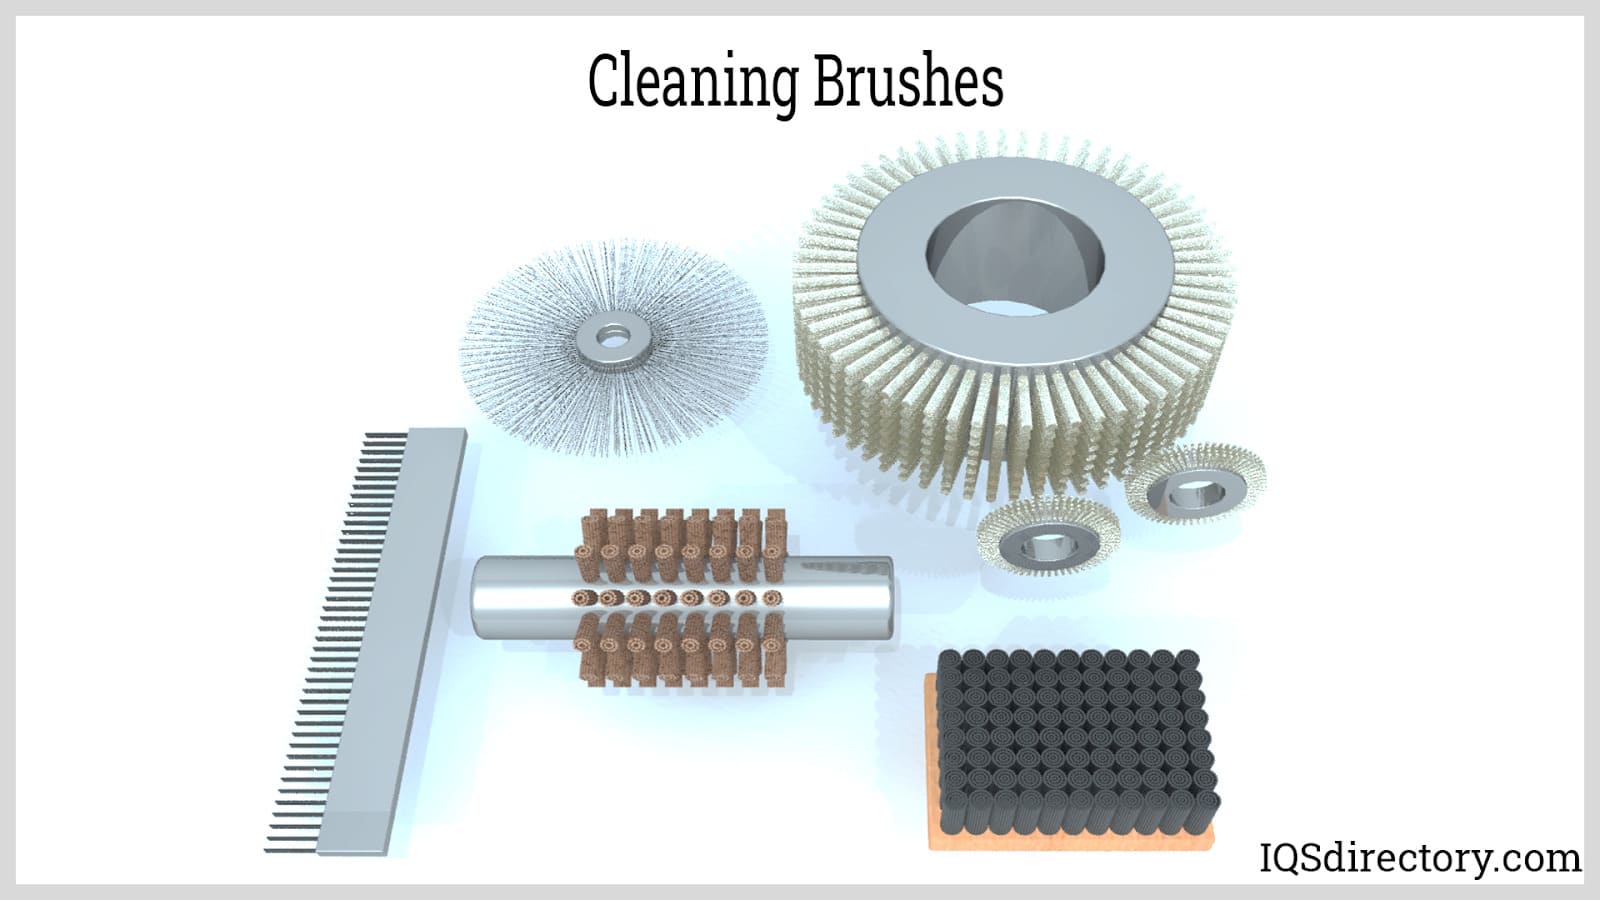 https://www.iqsdirectory.com/articles/brush/cleaning-brush/cleaning-brushes.jpg